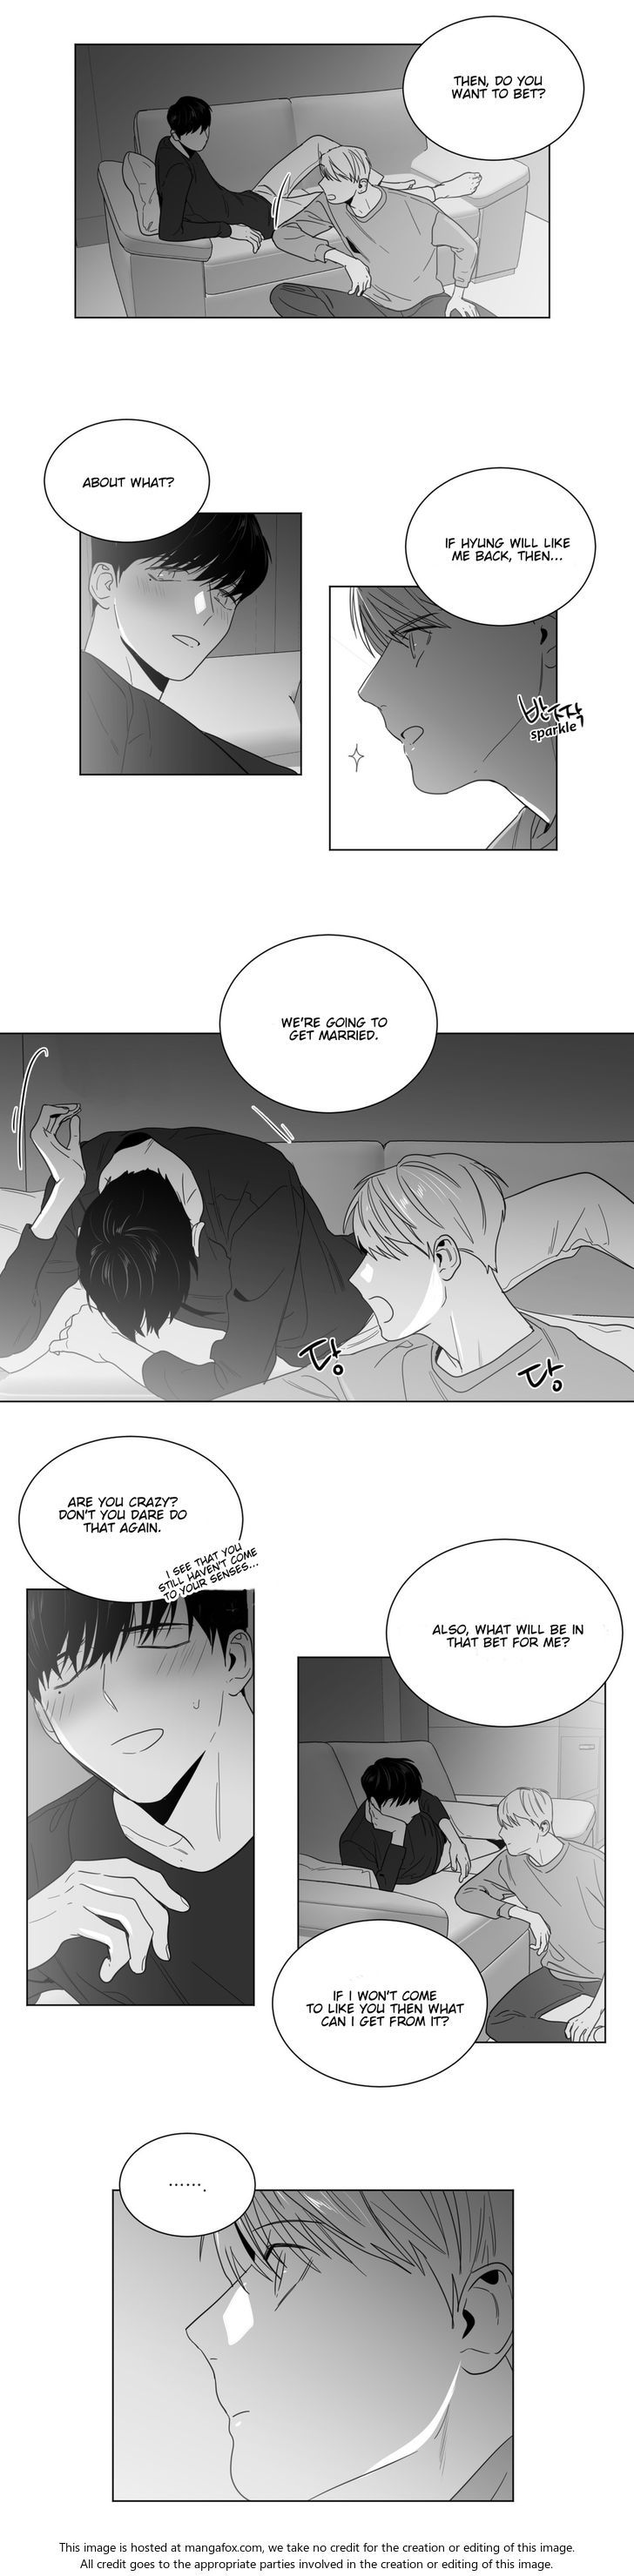 Lover Boy (Lezhin) Chapter 019 page 5